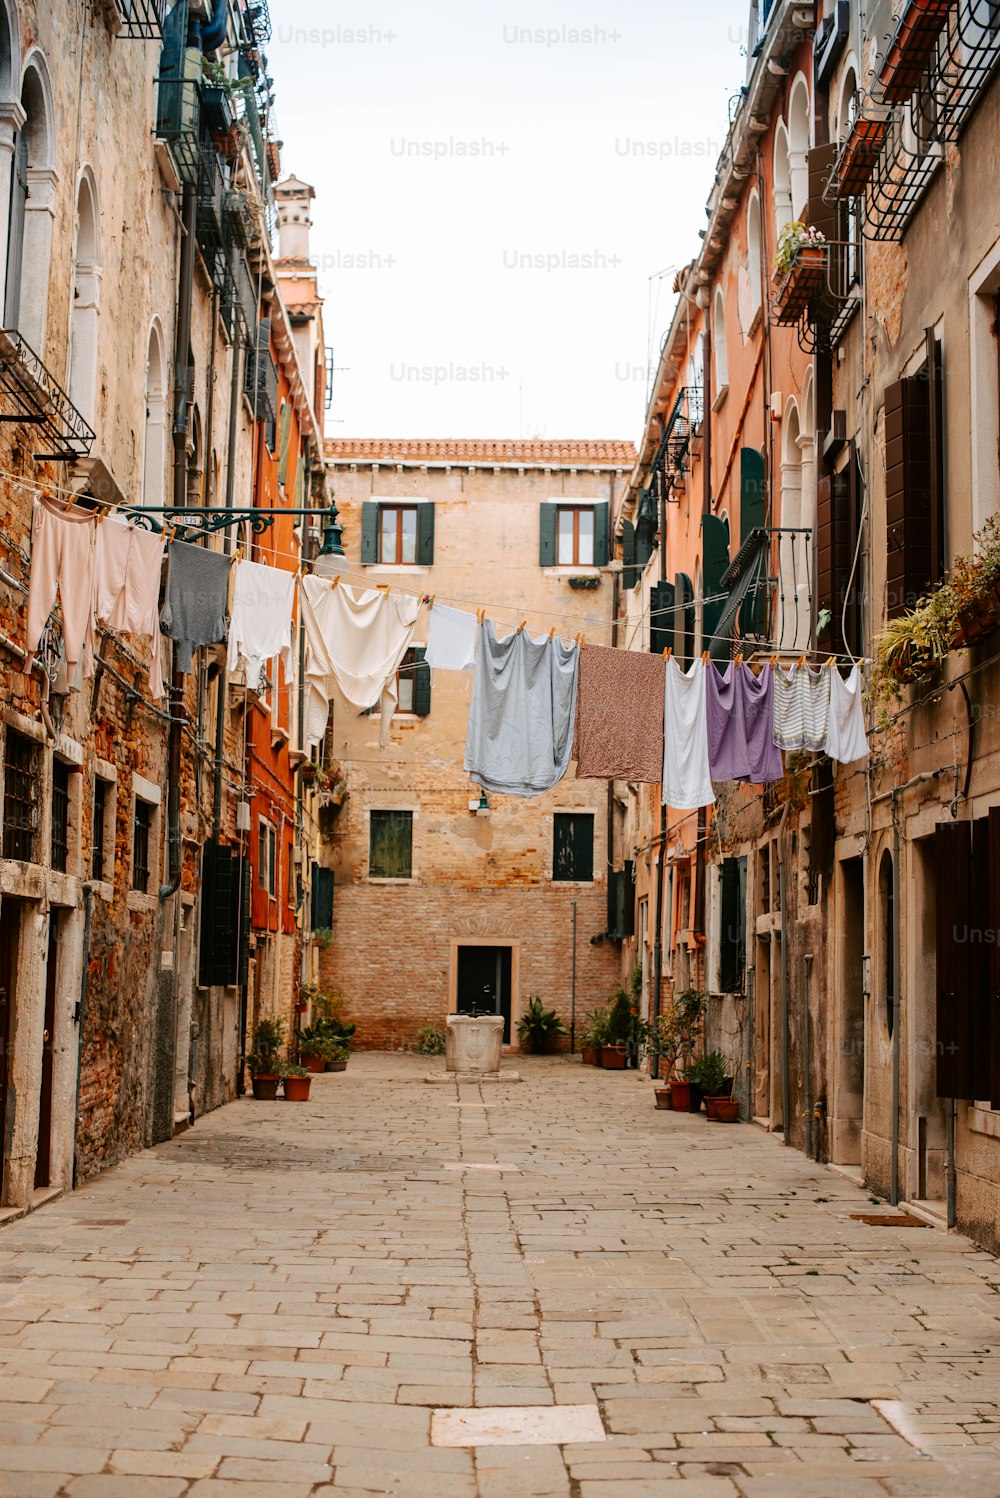 an alley way with clothes hanging on a line